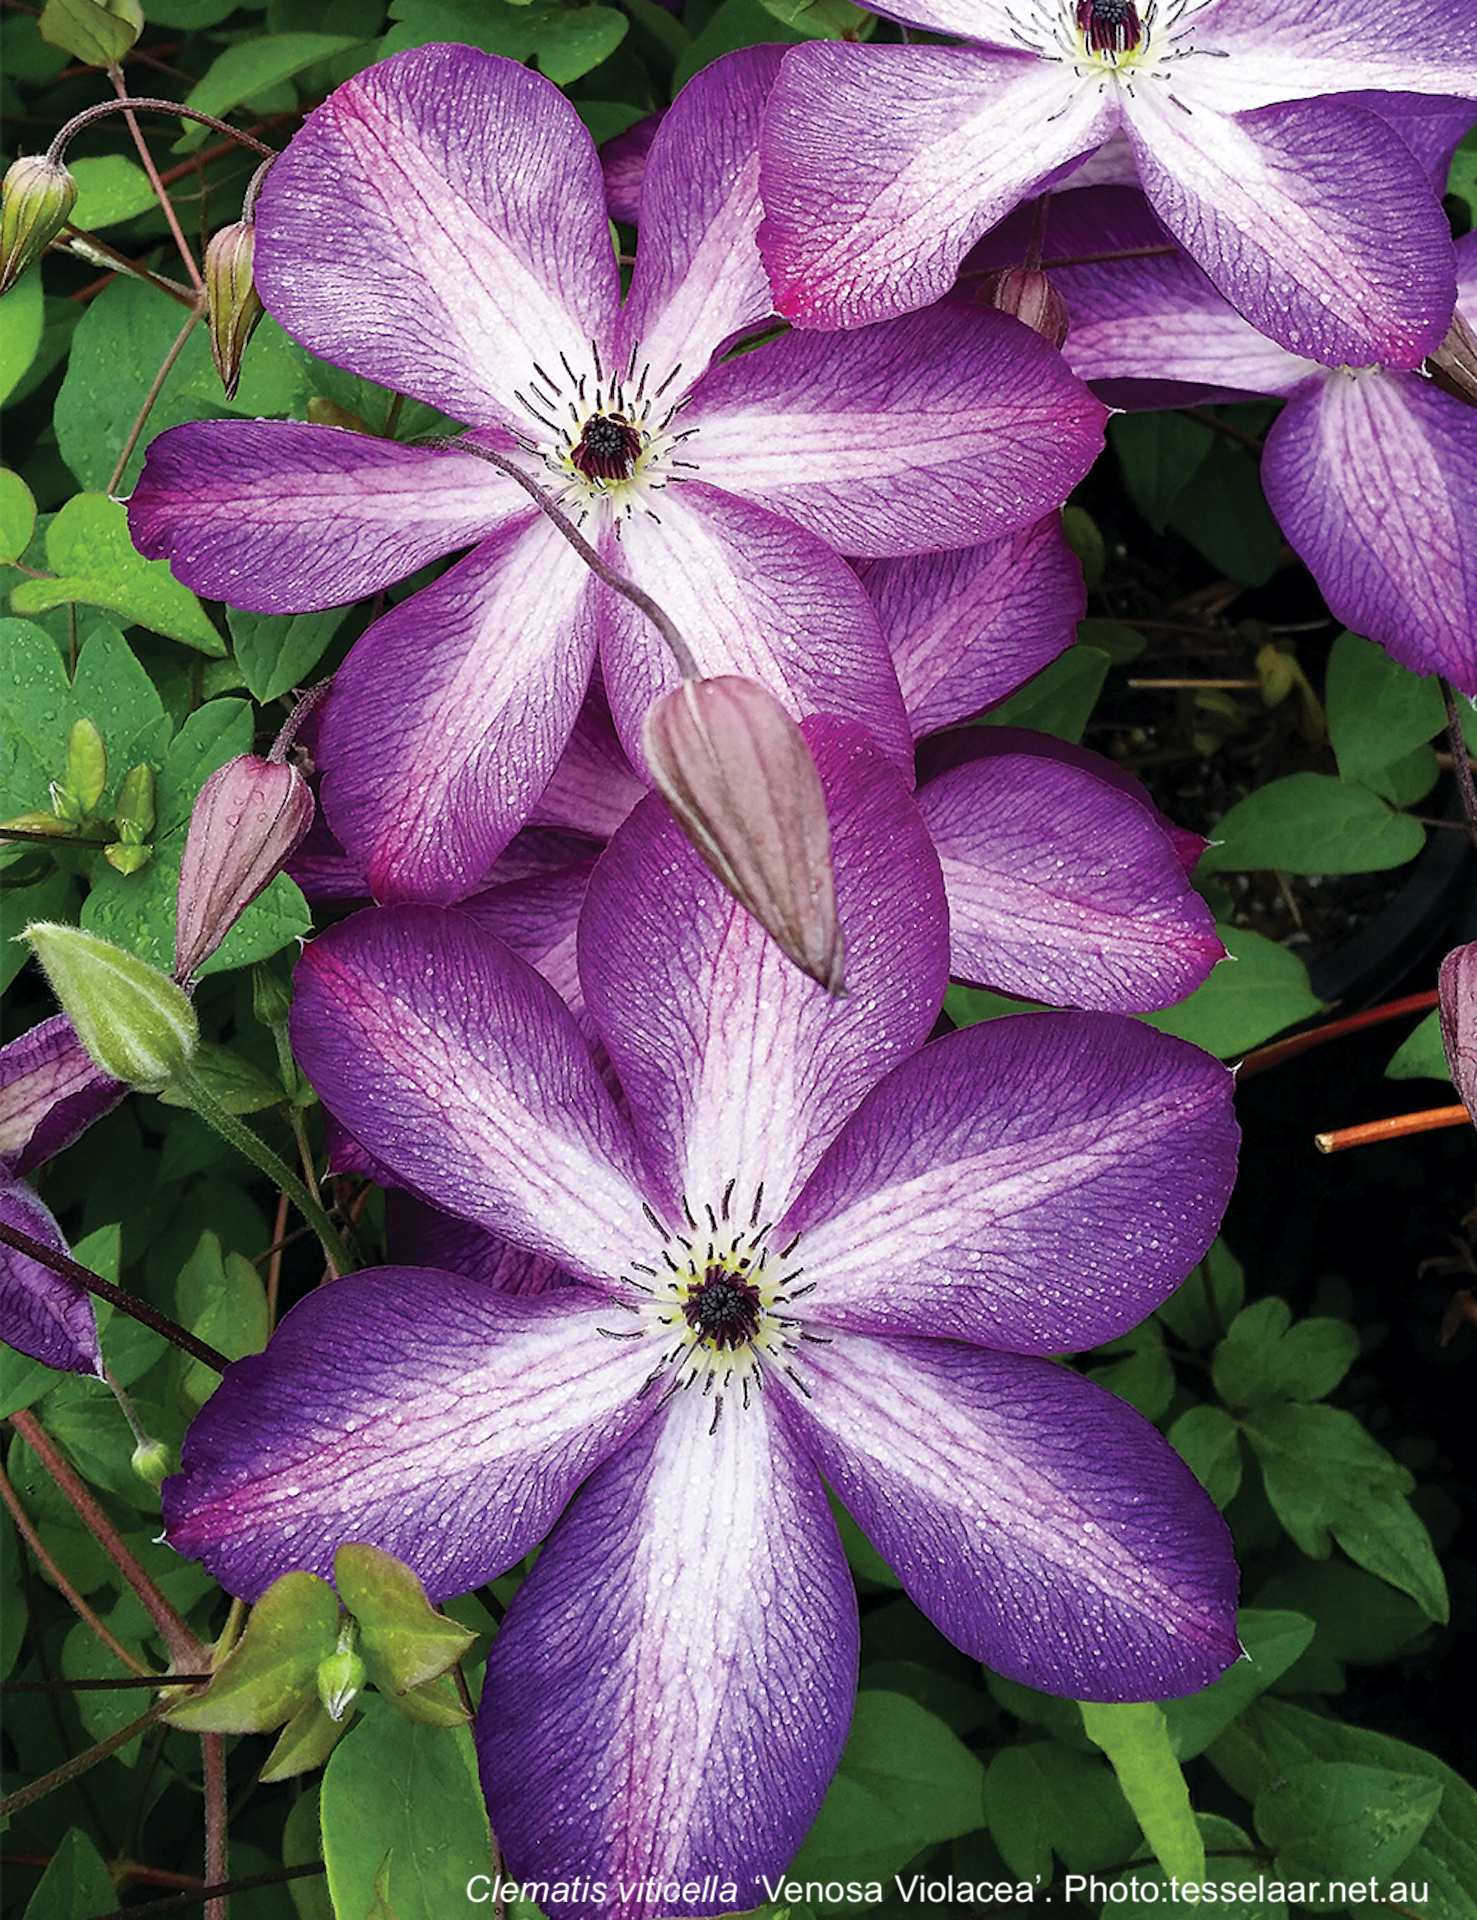 Clematis viticella 'Venosa Violacea' with white bands on a purple background.